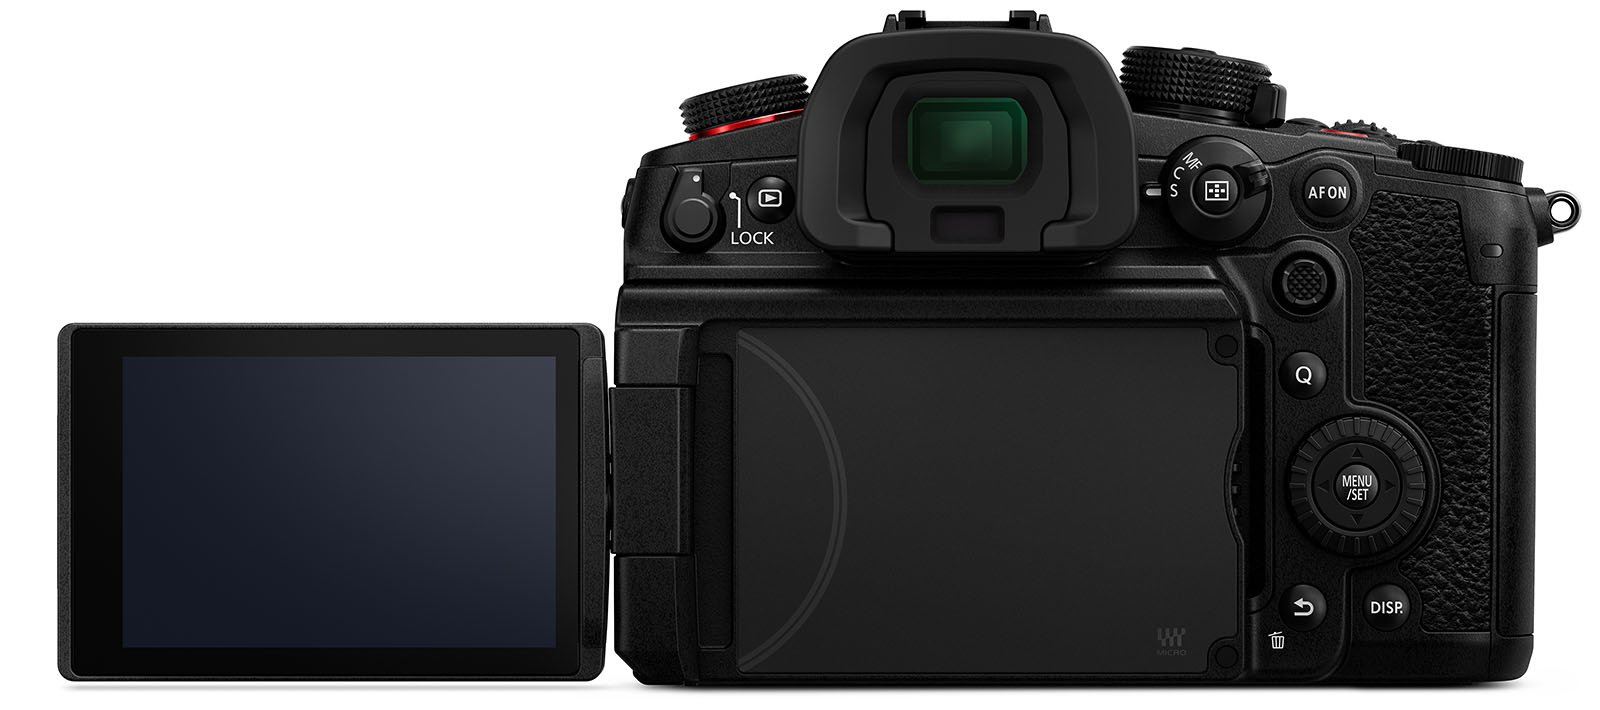 Back view of a digital camera with a flip-out LCD screen extended to the side. The camera has multiple buttons and dials, including a locking mechanism, a joystick, and a mode dial. The electronic viewfinder is prominently visible at the top center.